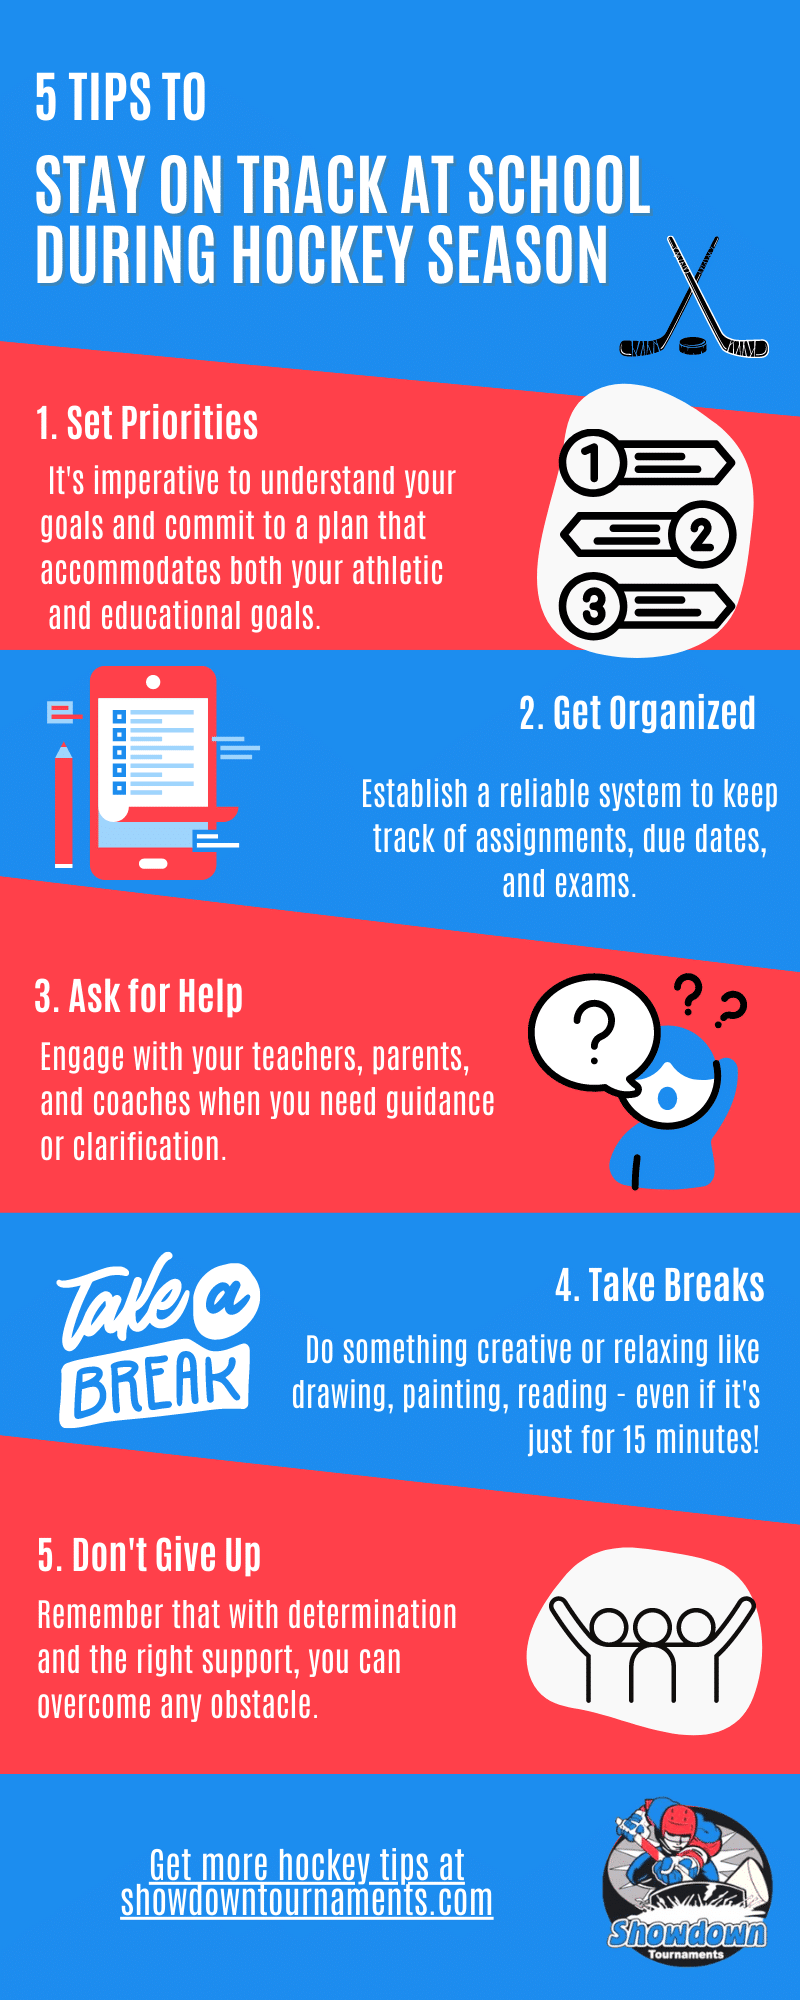 5 tips infographic for hockey players and hockey parents from Showdown Tournaments in Washington D.C. and Nashville, TN